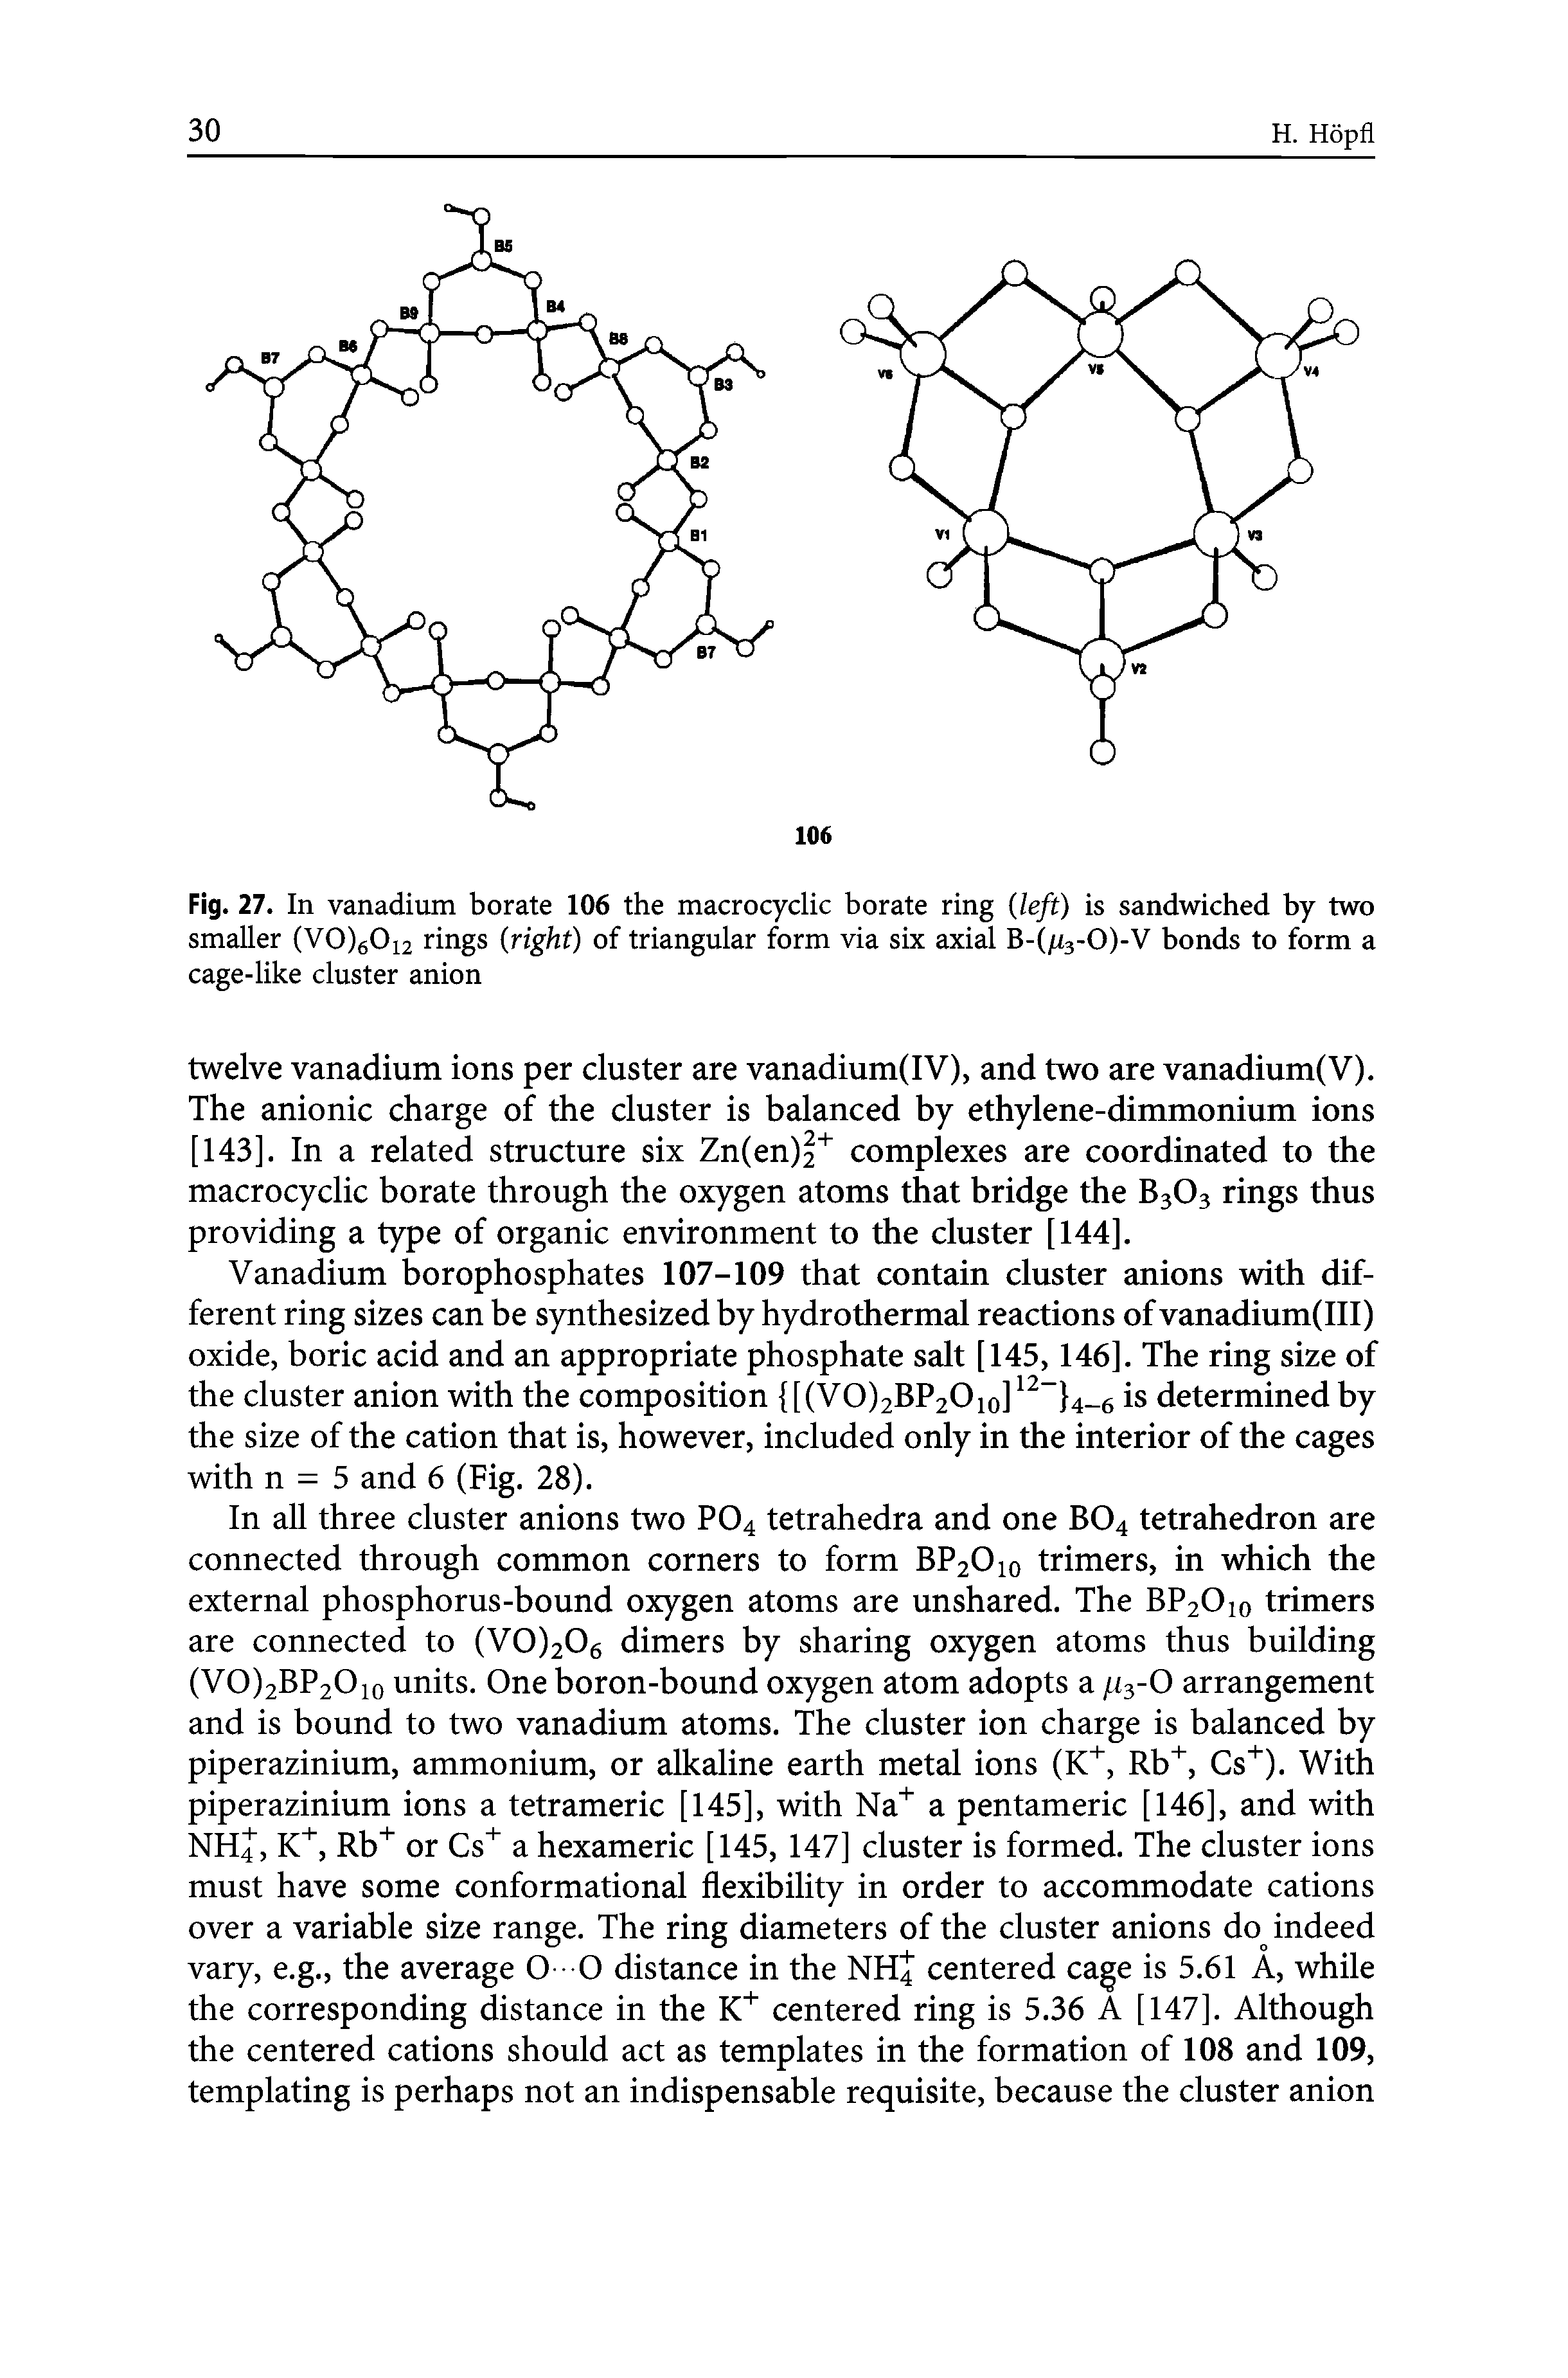 Fig. 27. In vanadium borate 106 the macrocyclic borate ring (left) is sandwiched by two smaller (VO)60i2 rings (right) of triangular form via six axial B-( 3-0)-V bonds to form a cage-like cluster anion...